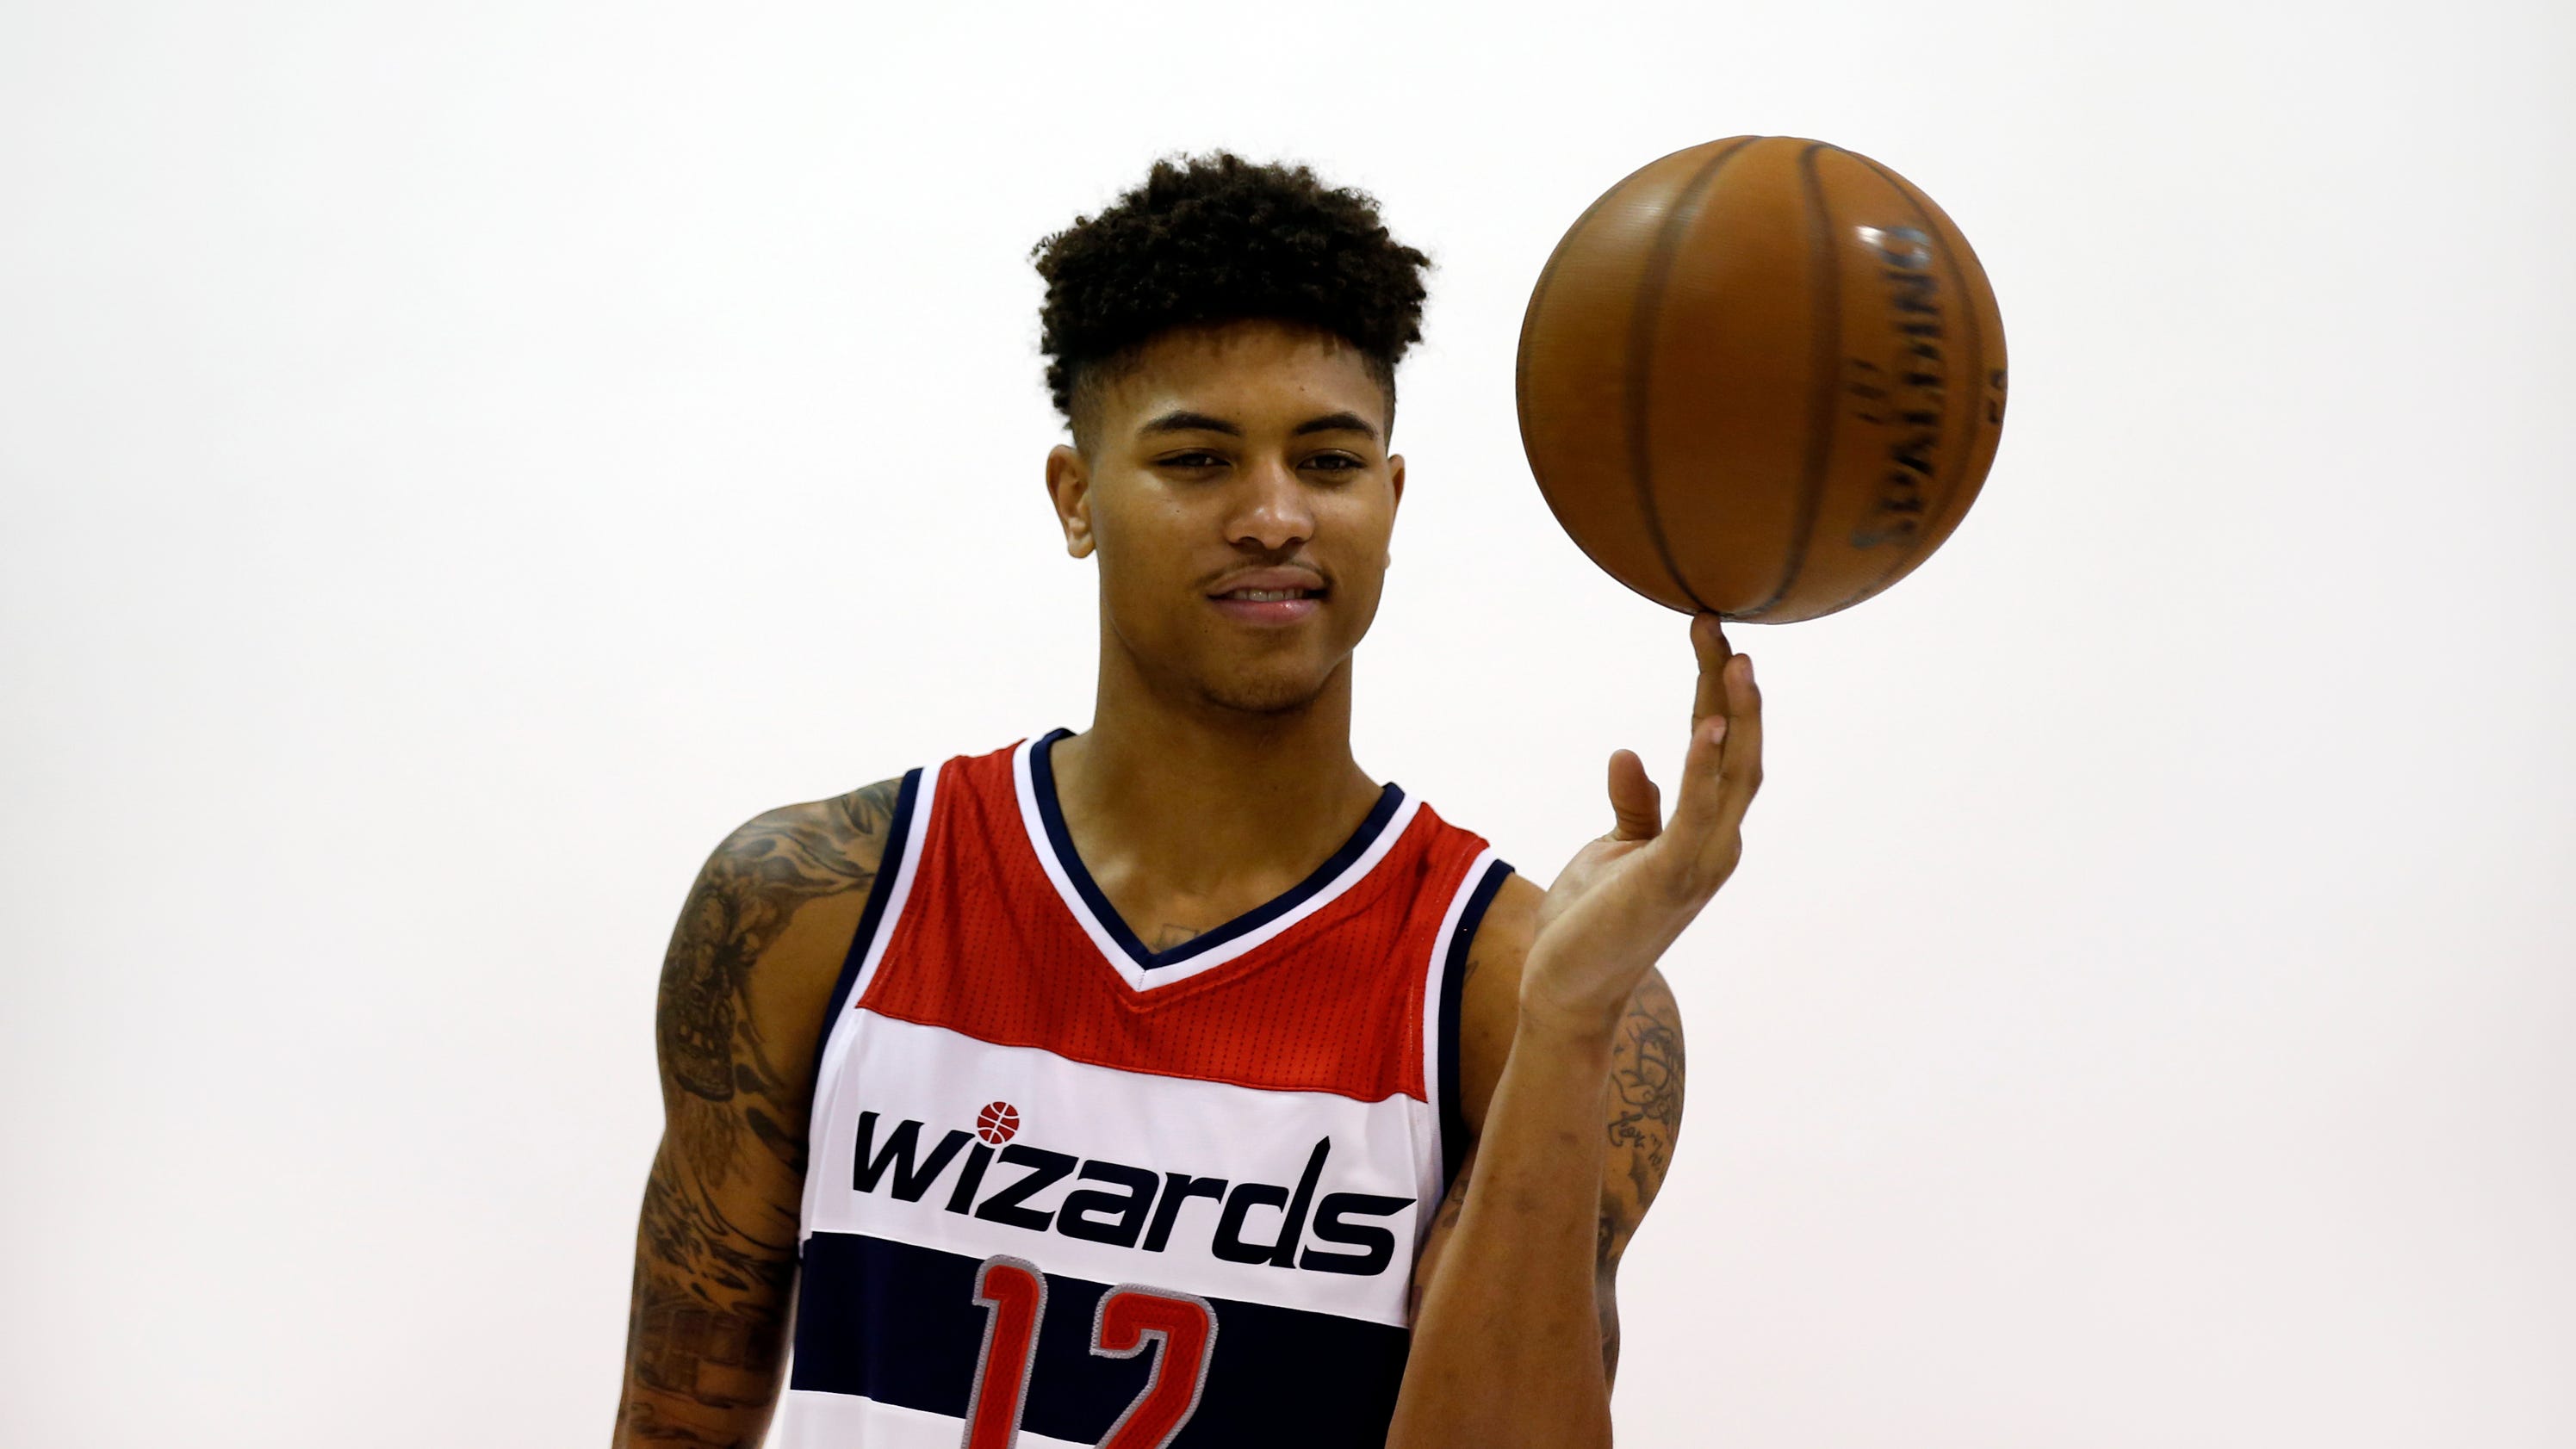 Wizards rookie Oubre filled with confidence